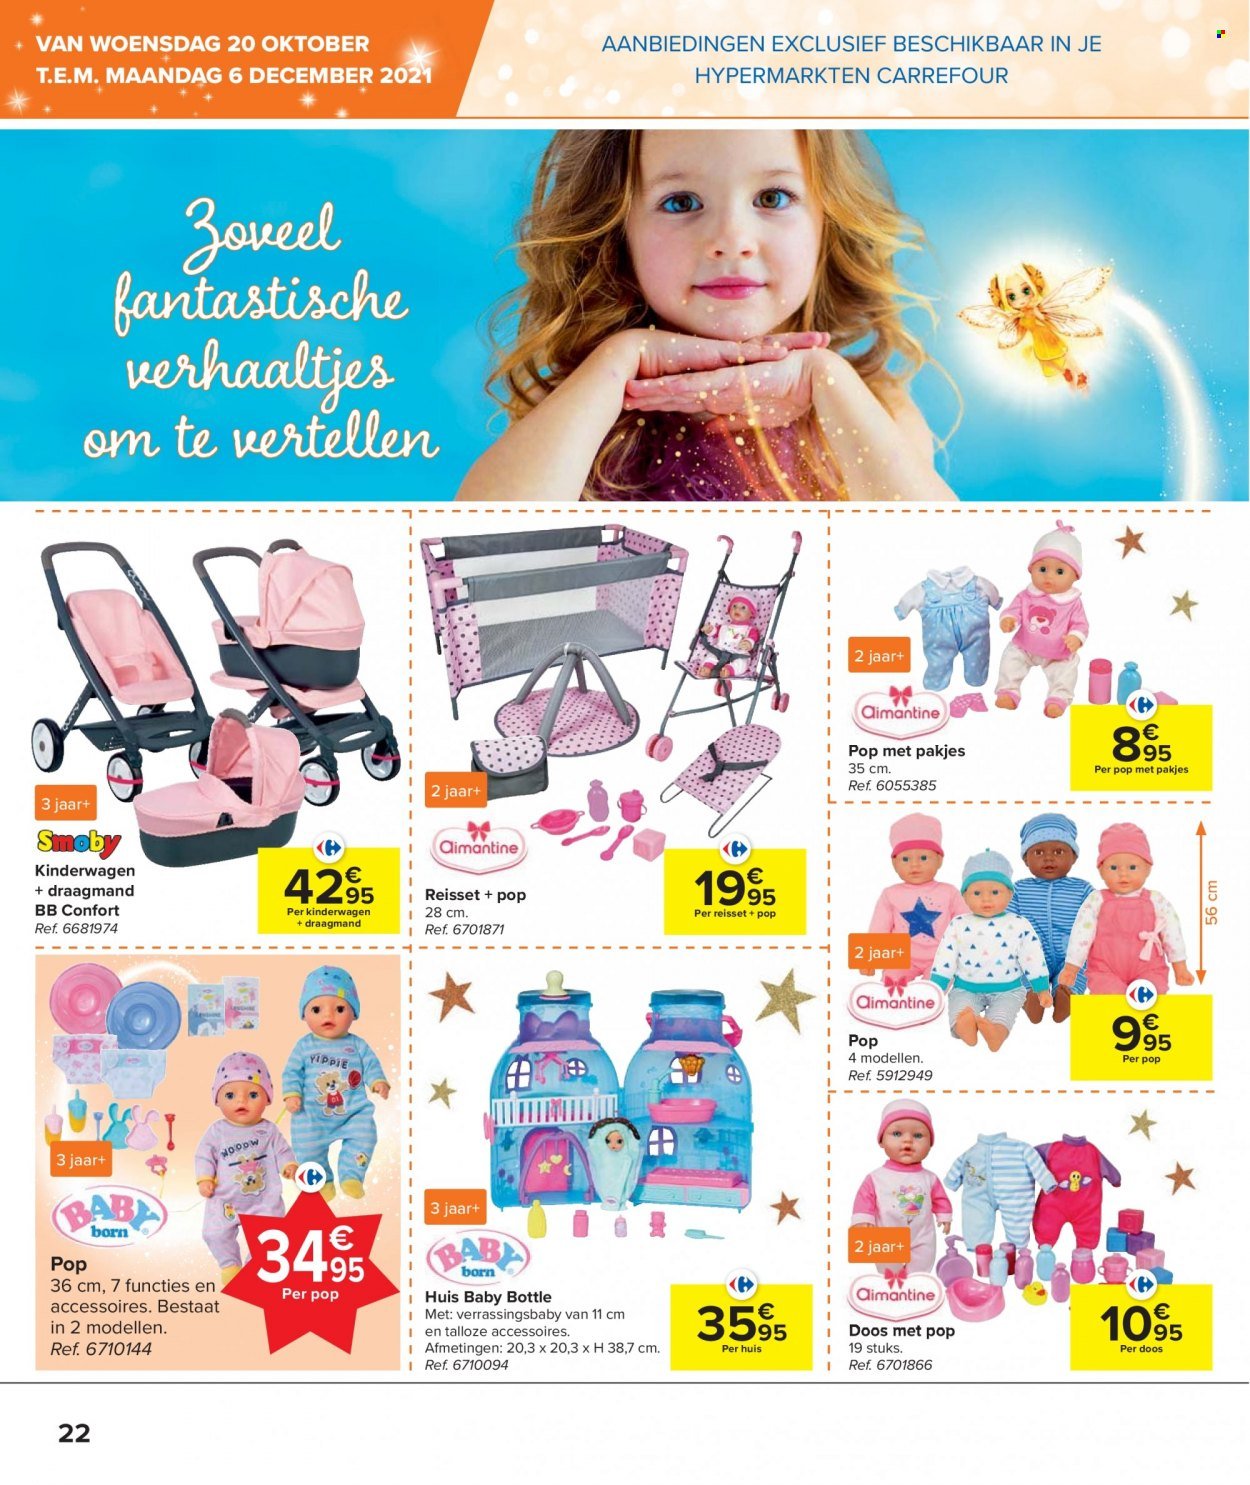 Catalogue Carrefour hypermarkt - 20.10.2021 - 6.12.2021. Page 22.